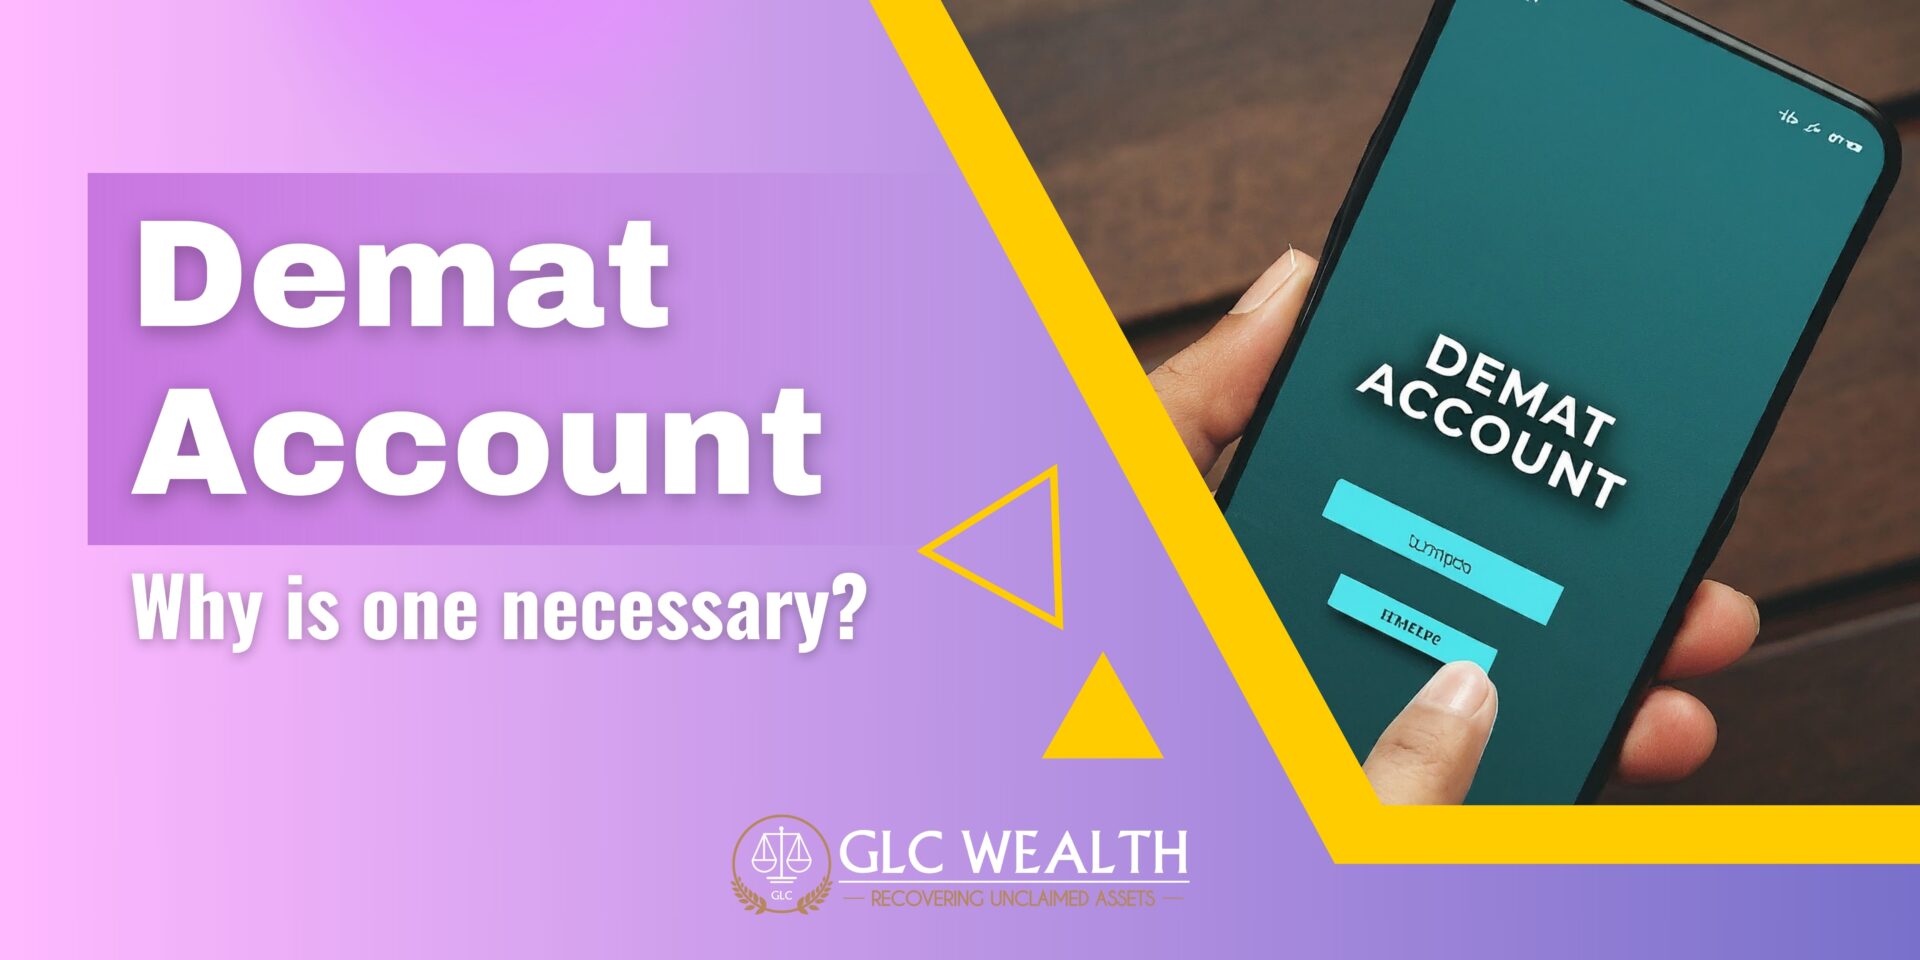 What is a Demat account and why is one necessary?